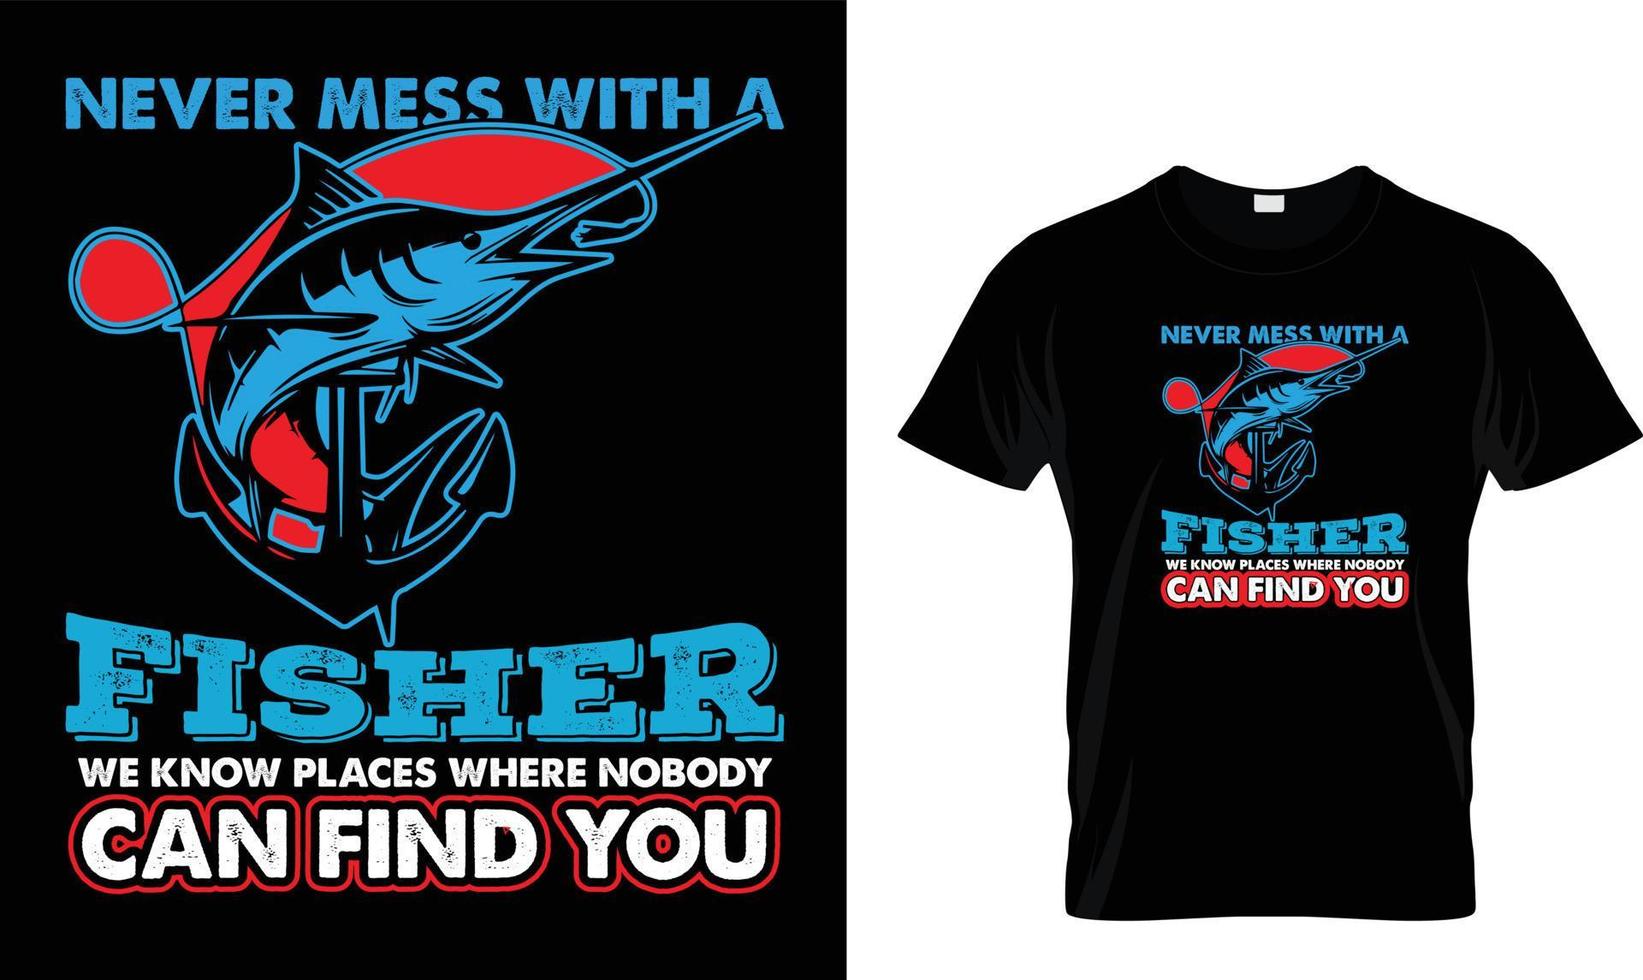 Never mess with a Fisher...T-shirt design template vector